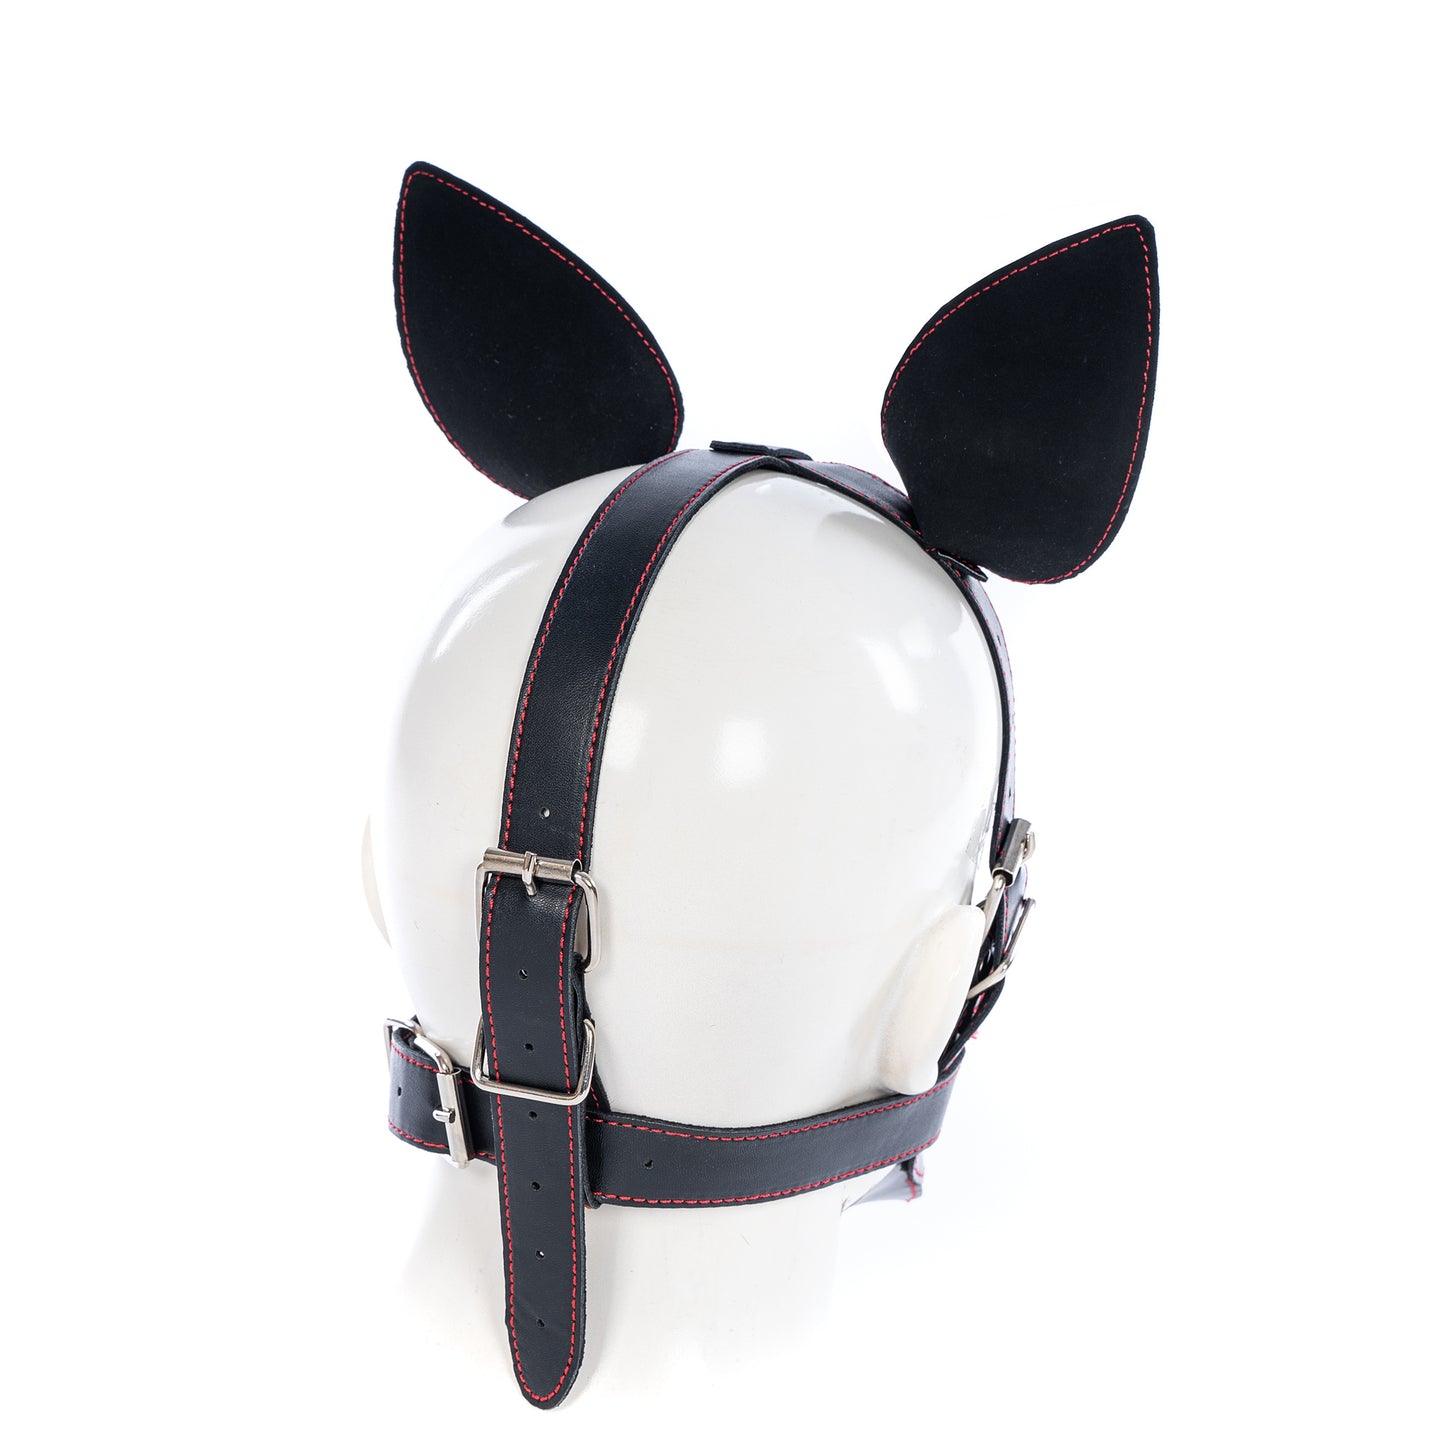 Pup Puppy Play Leather Hood Pet Mask